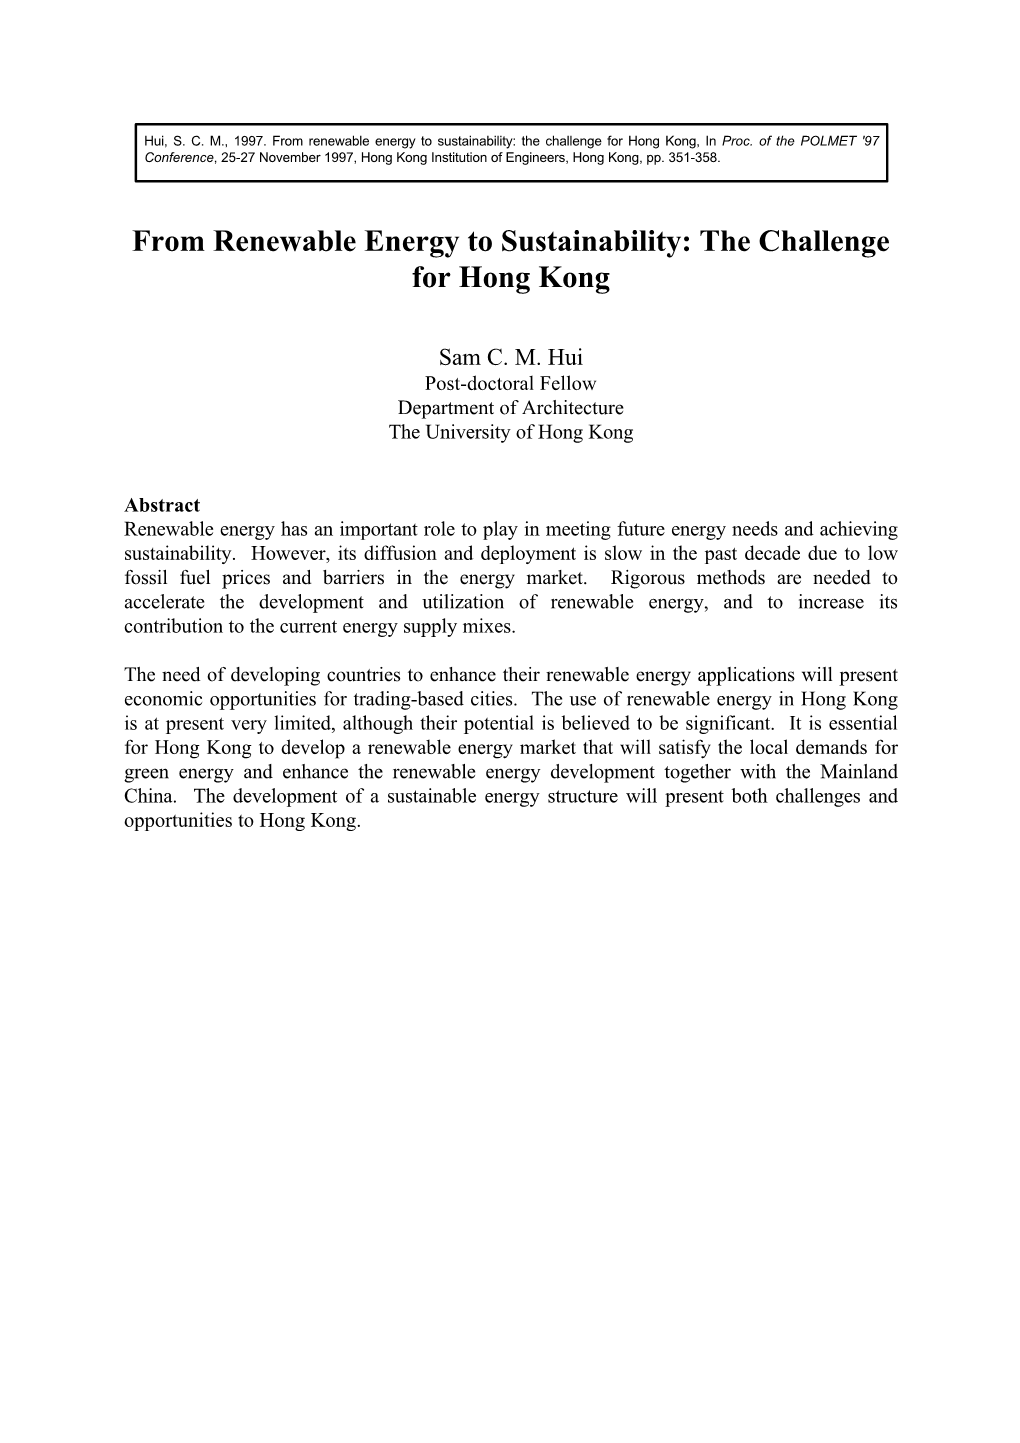 From Renewable Energy to Sustainability: the Challenge for Hong Kong, in Proc